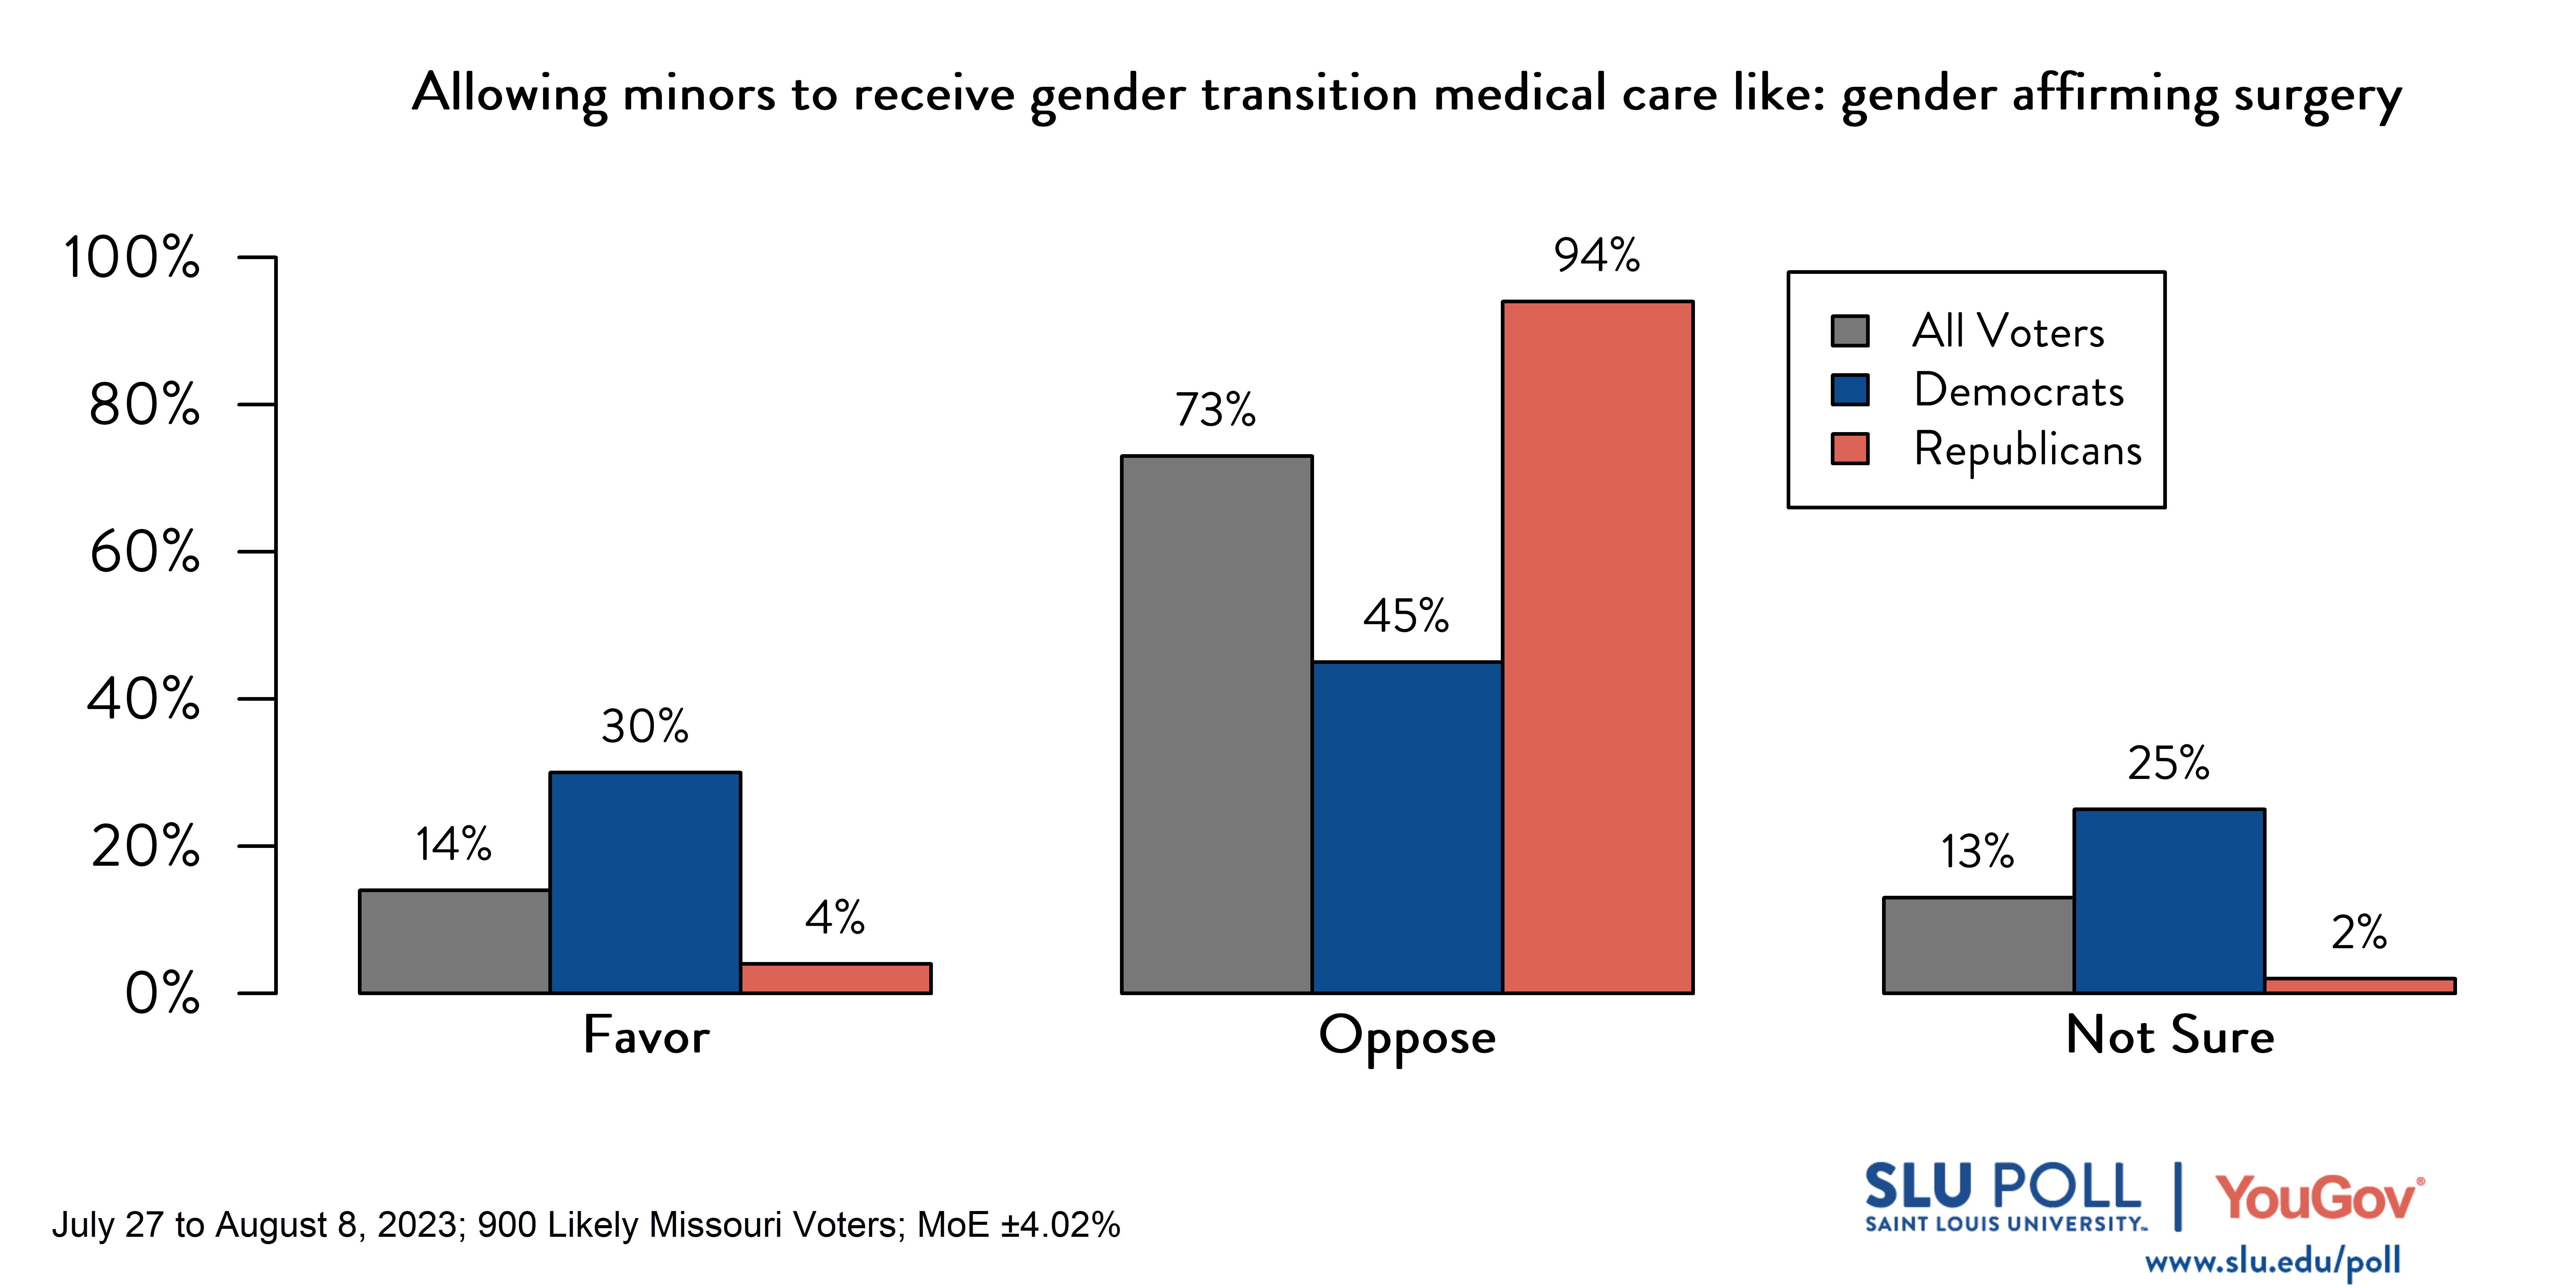 Likely voters' responses to 'Do you favor or oppose allowing someone younger than 18 to receive gender transition medical care like: gender affirming surgery?': 14% Favor, 73% Oppose, and 13% Not Sure. Democratic voters' responses: ' 30% Favor, 45% Oppose, and 25% Not Sure. Republican voters' responses: 4% Favor, 94% Oppose, and 2% Not Sure.